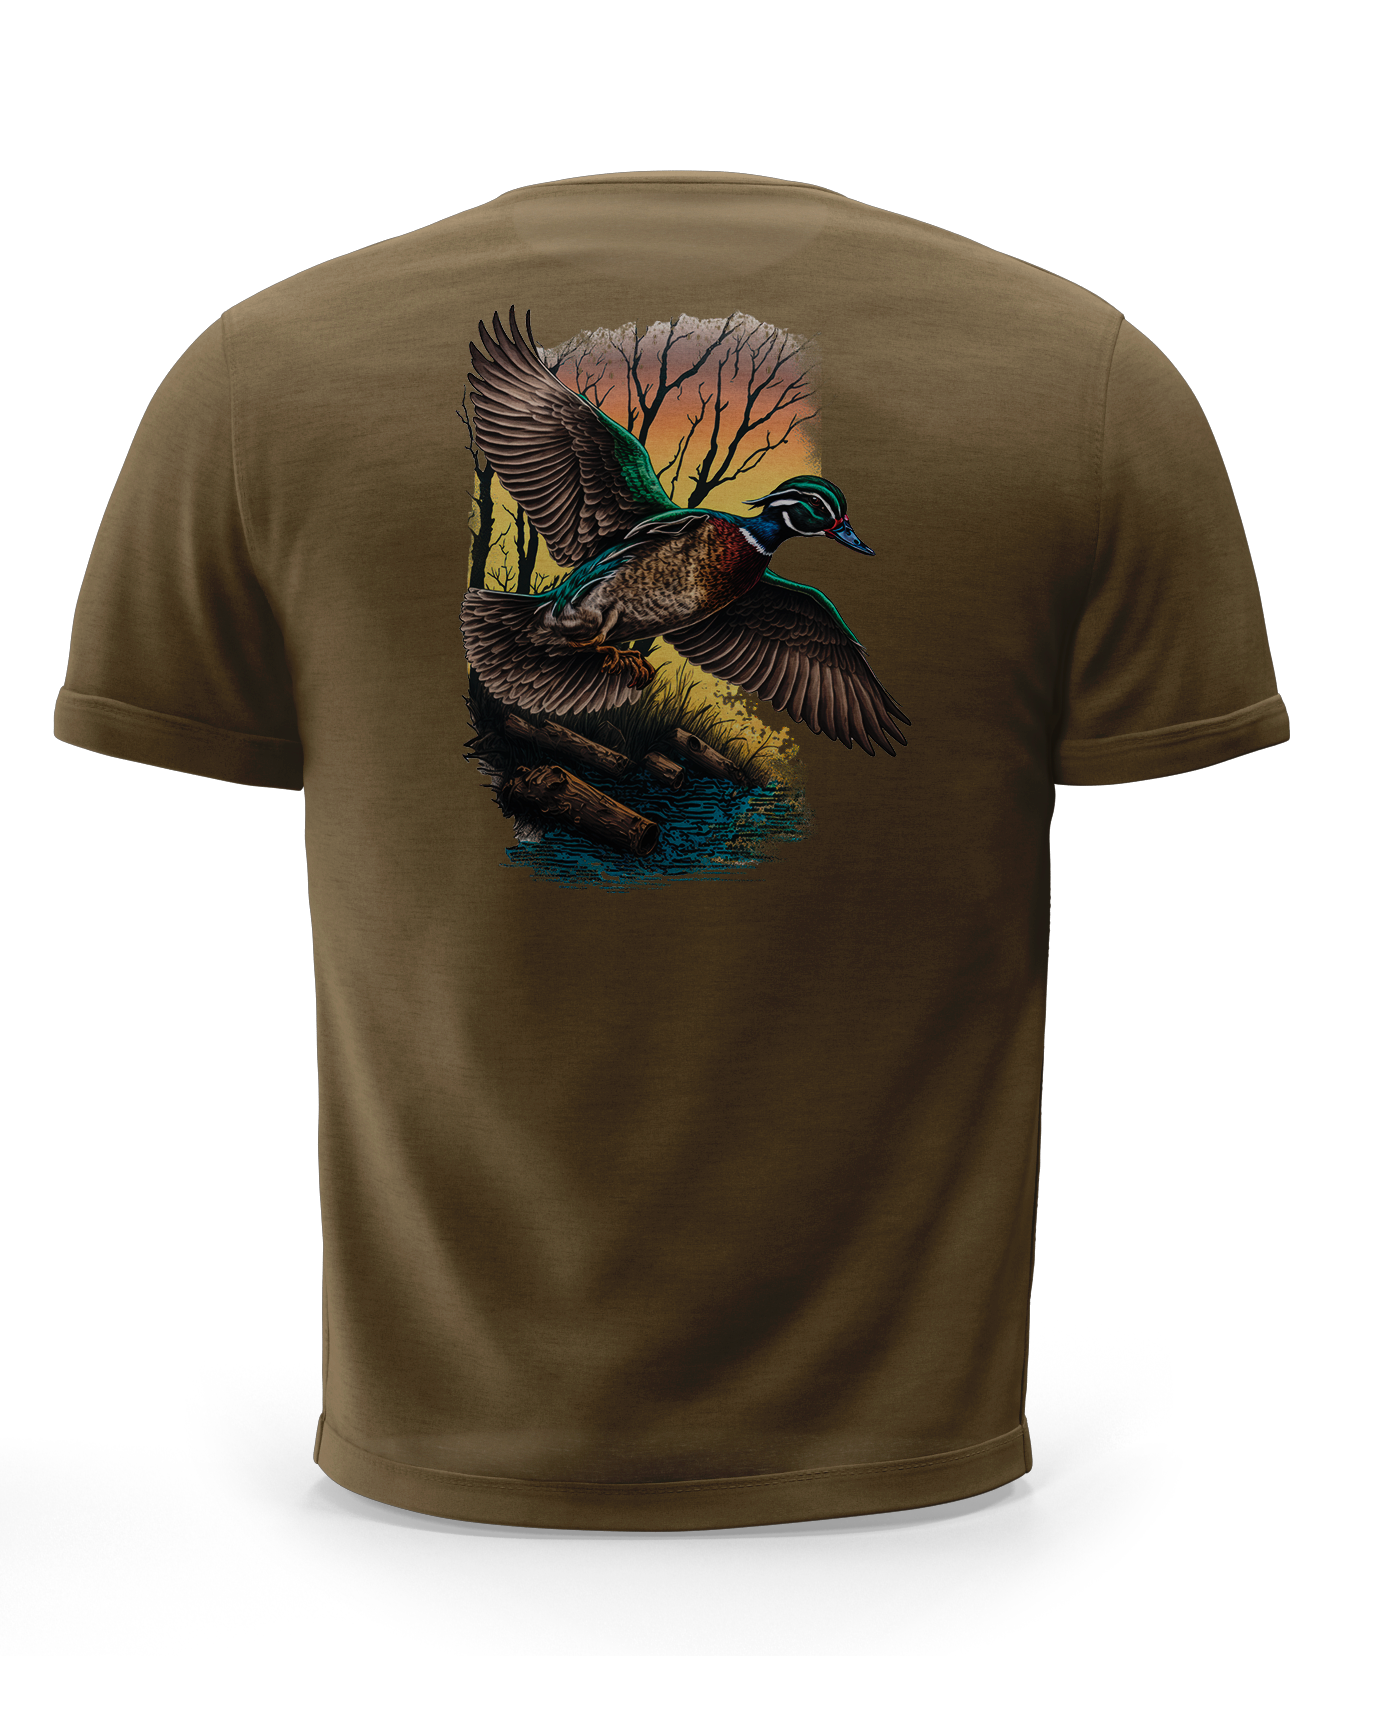 Wood Duck T-Shirt (3 Colors Available)